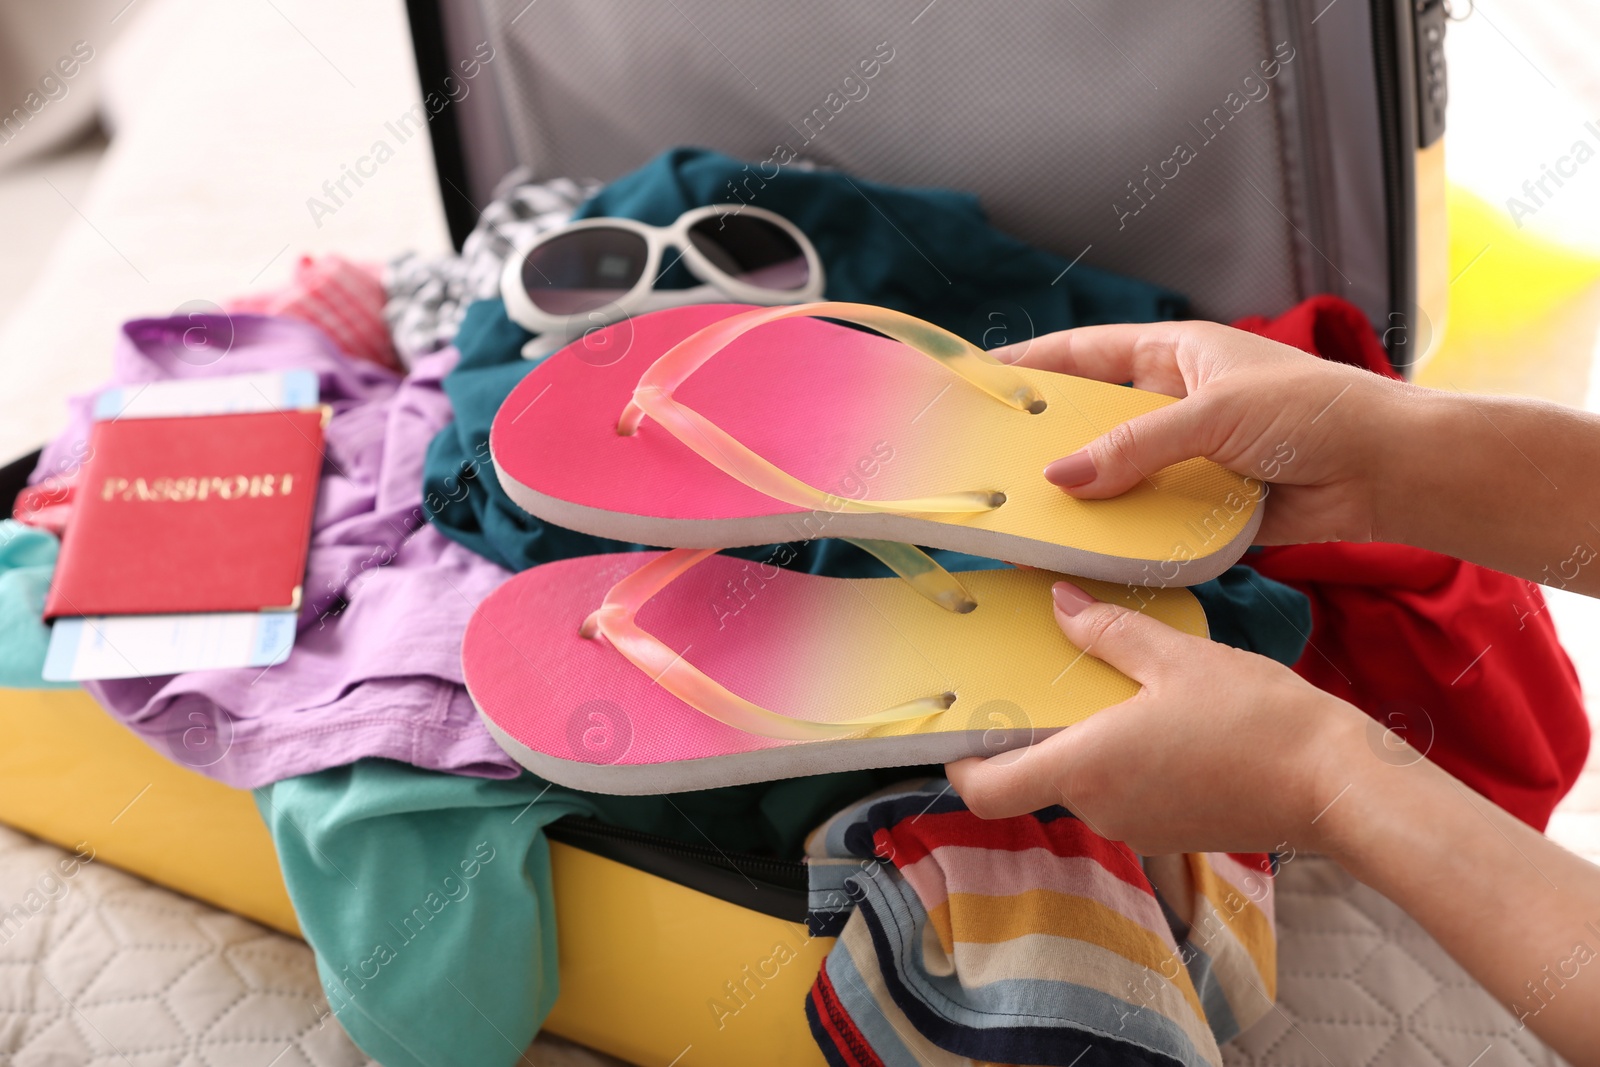 Photo of Woman packing suitcase for journey at home, closeup